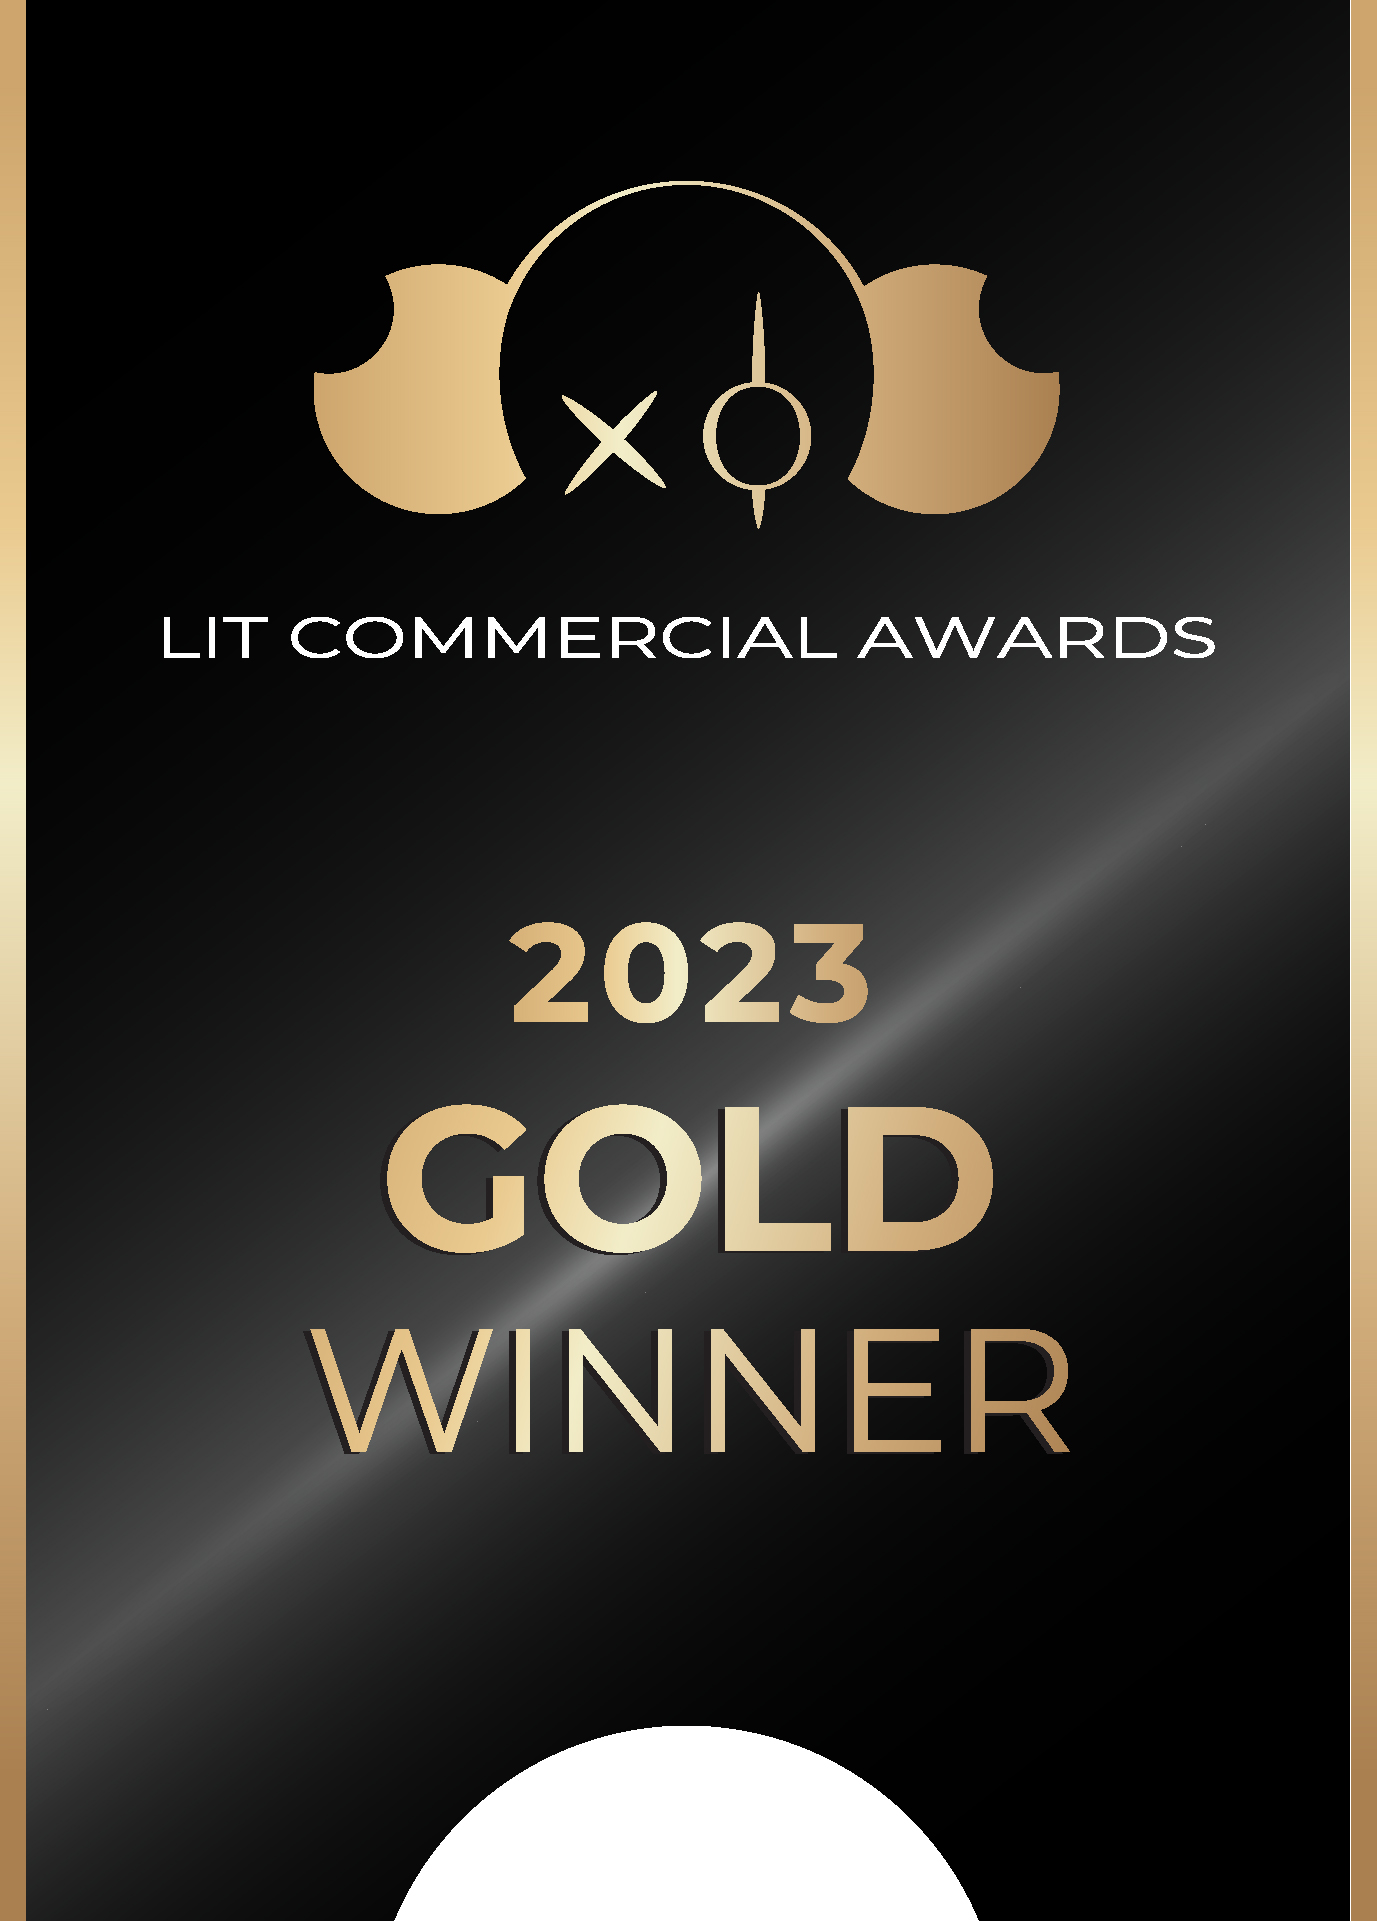 Dragon Horse Agency Crowned a Top Winner in the 2023 LIT Commercial Awards with 4 Golds!